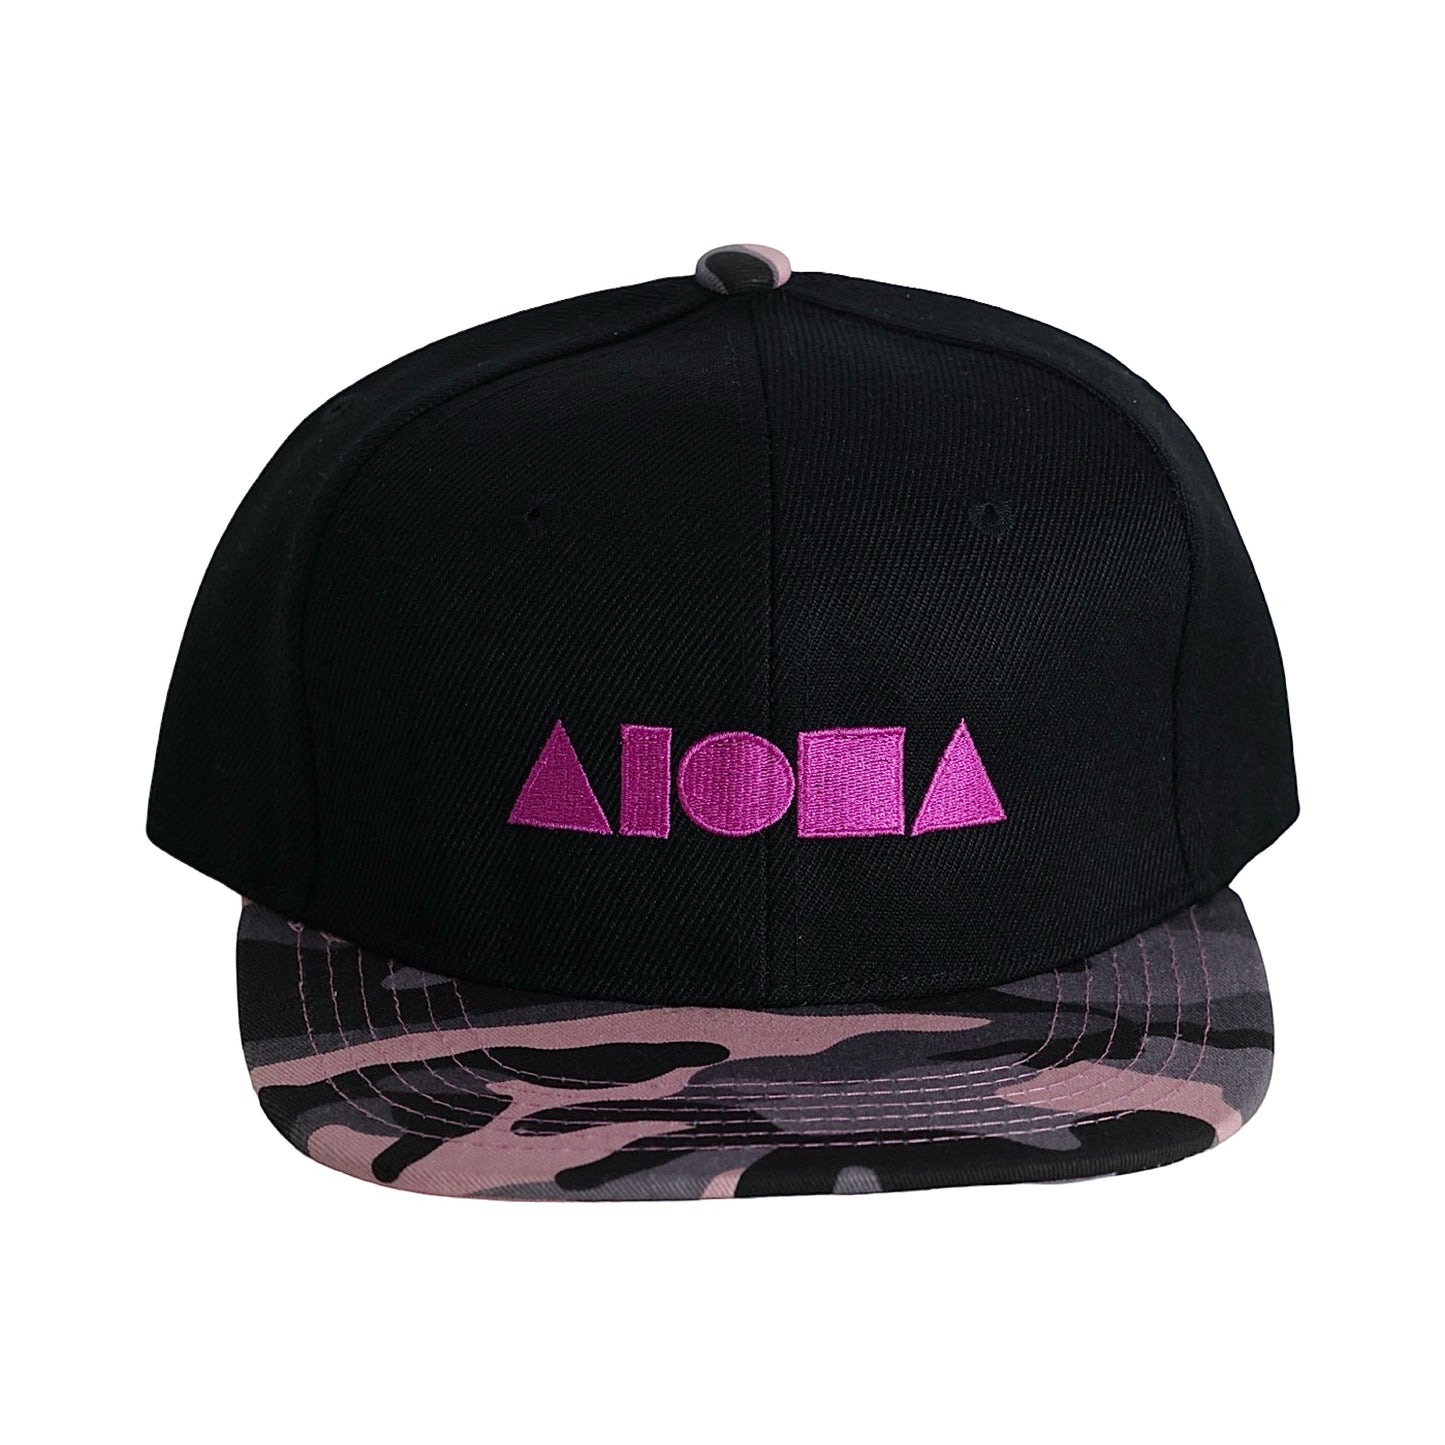 UNDERCOVER PINK CAMO Youth Snapback